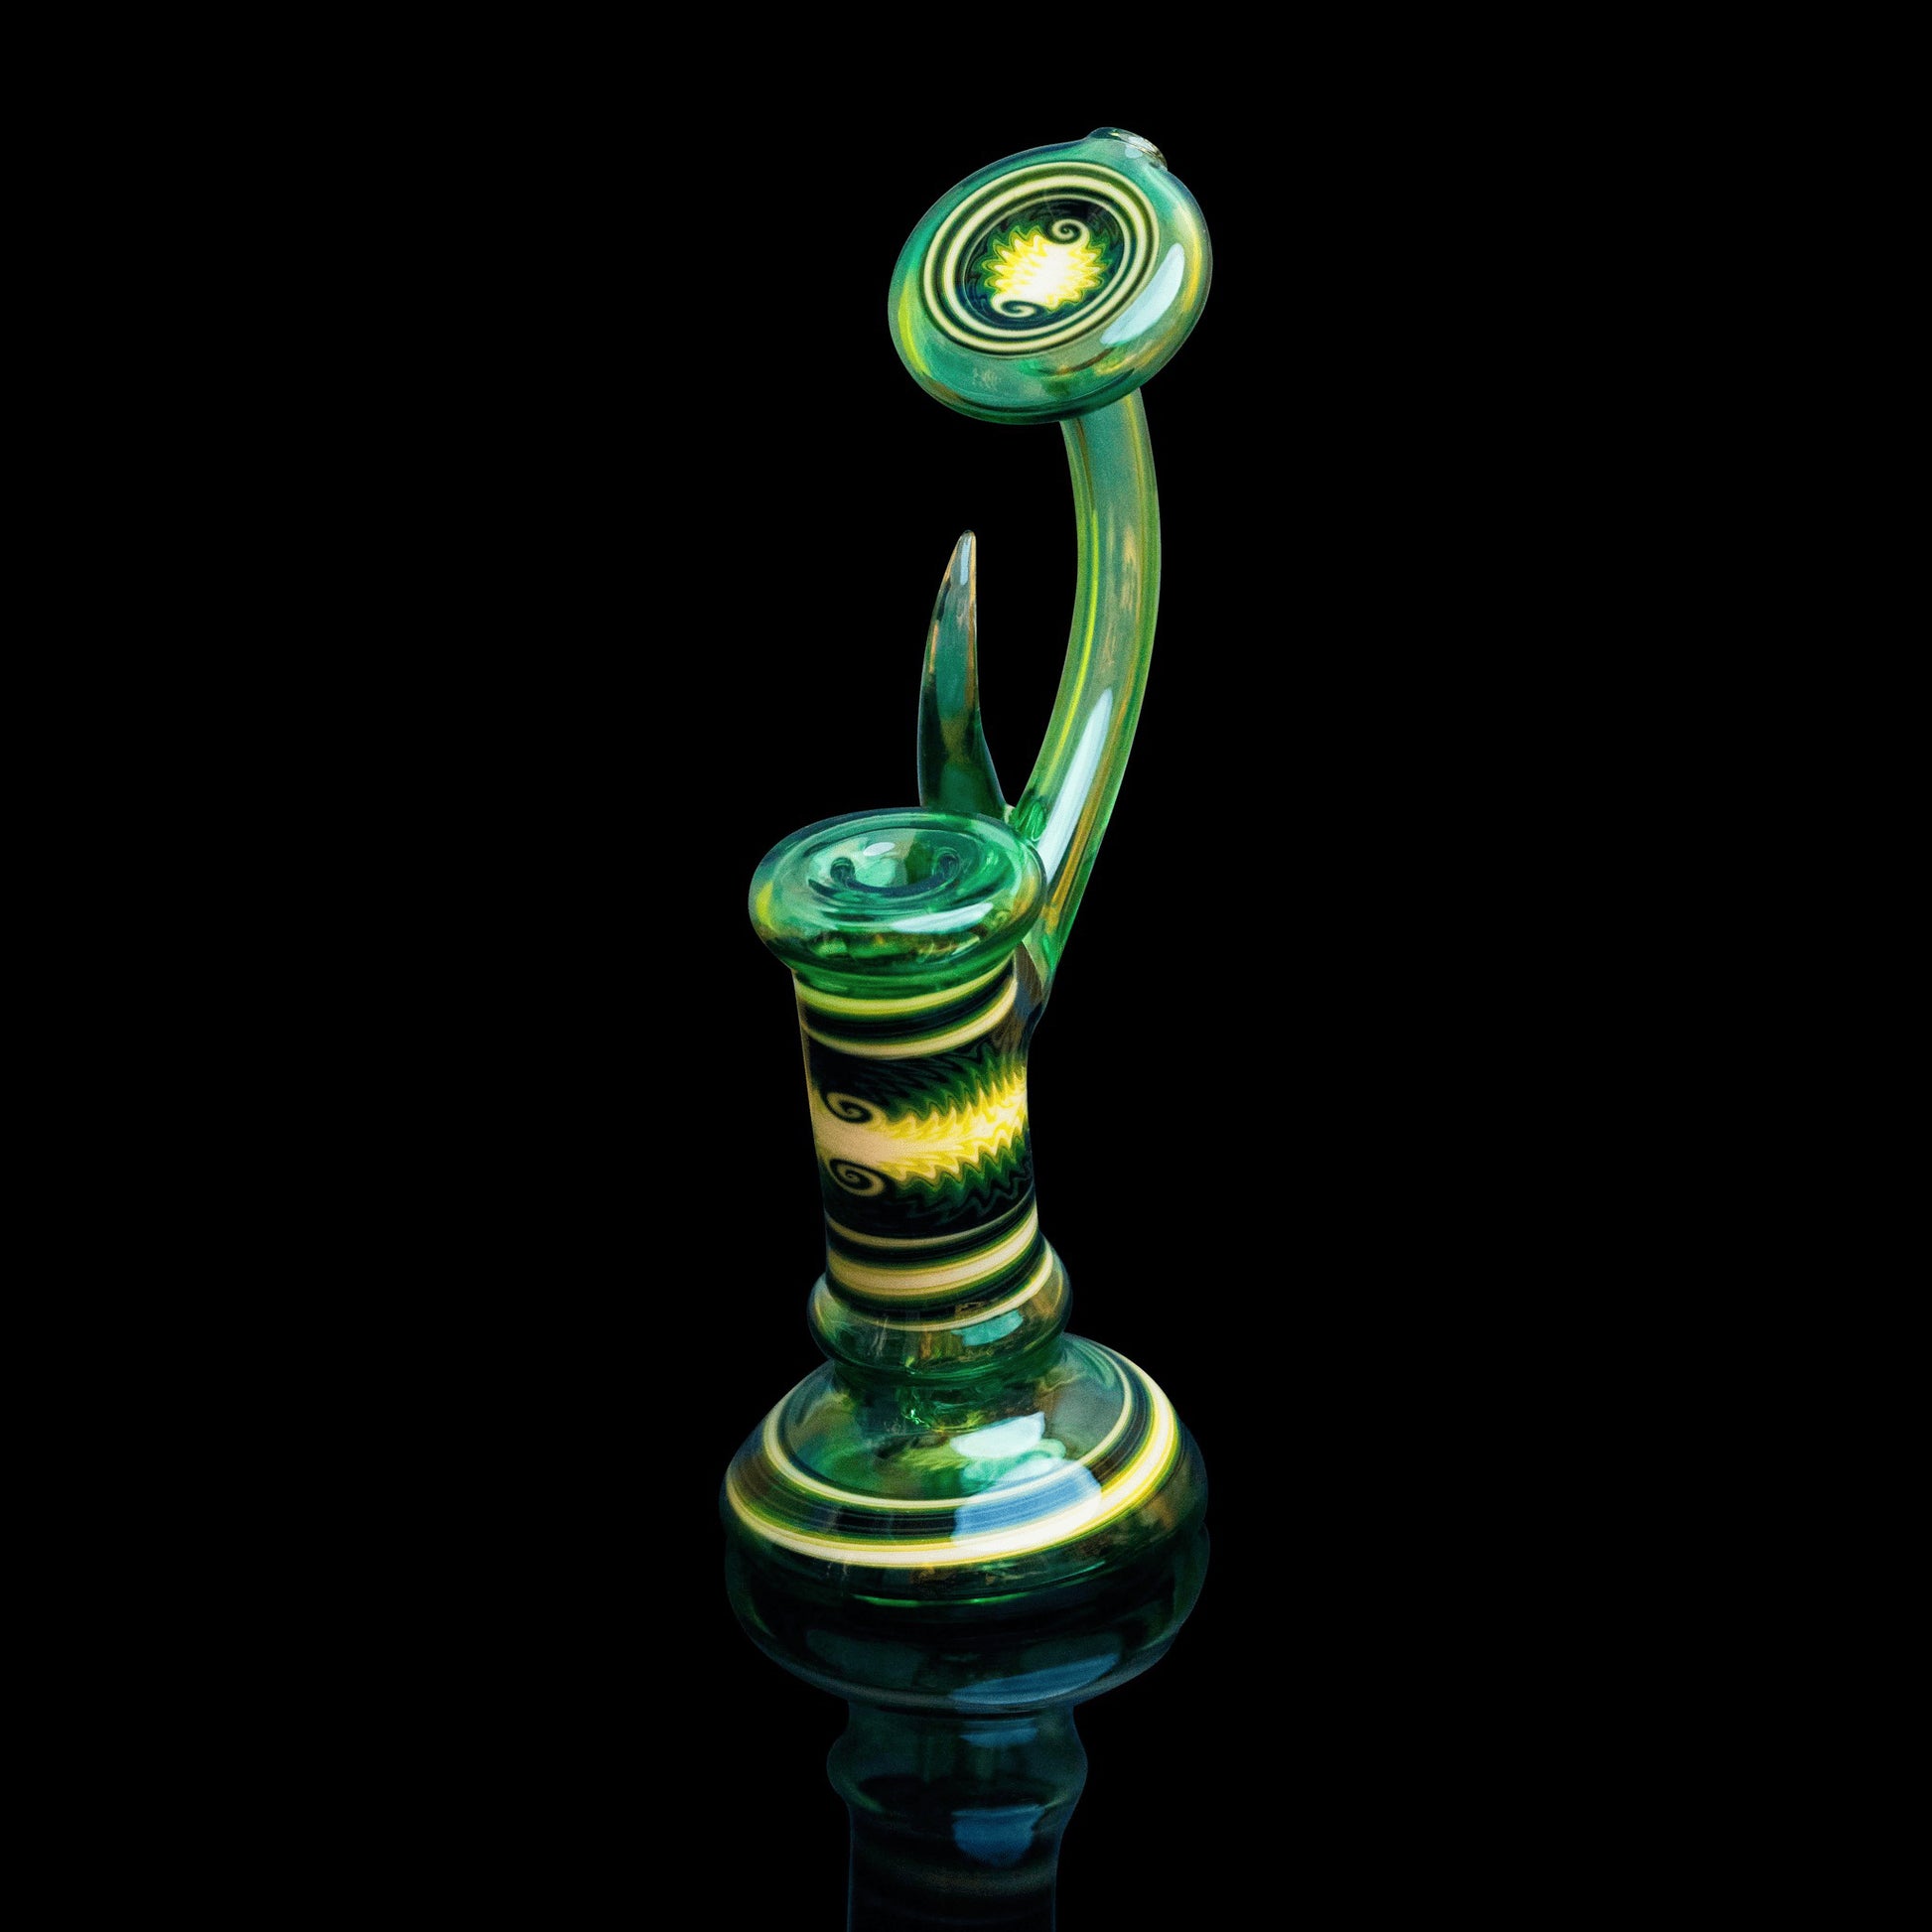 exquisite design of the Green Rig by NateyLove (2021)